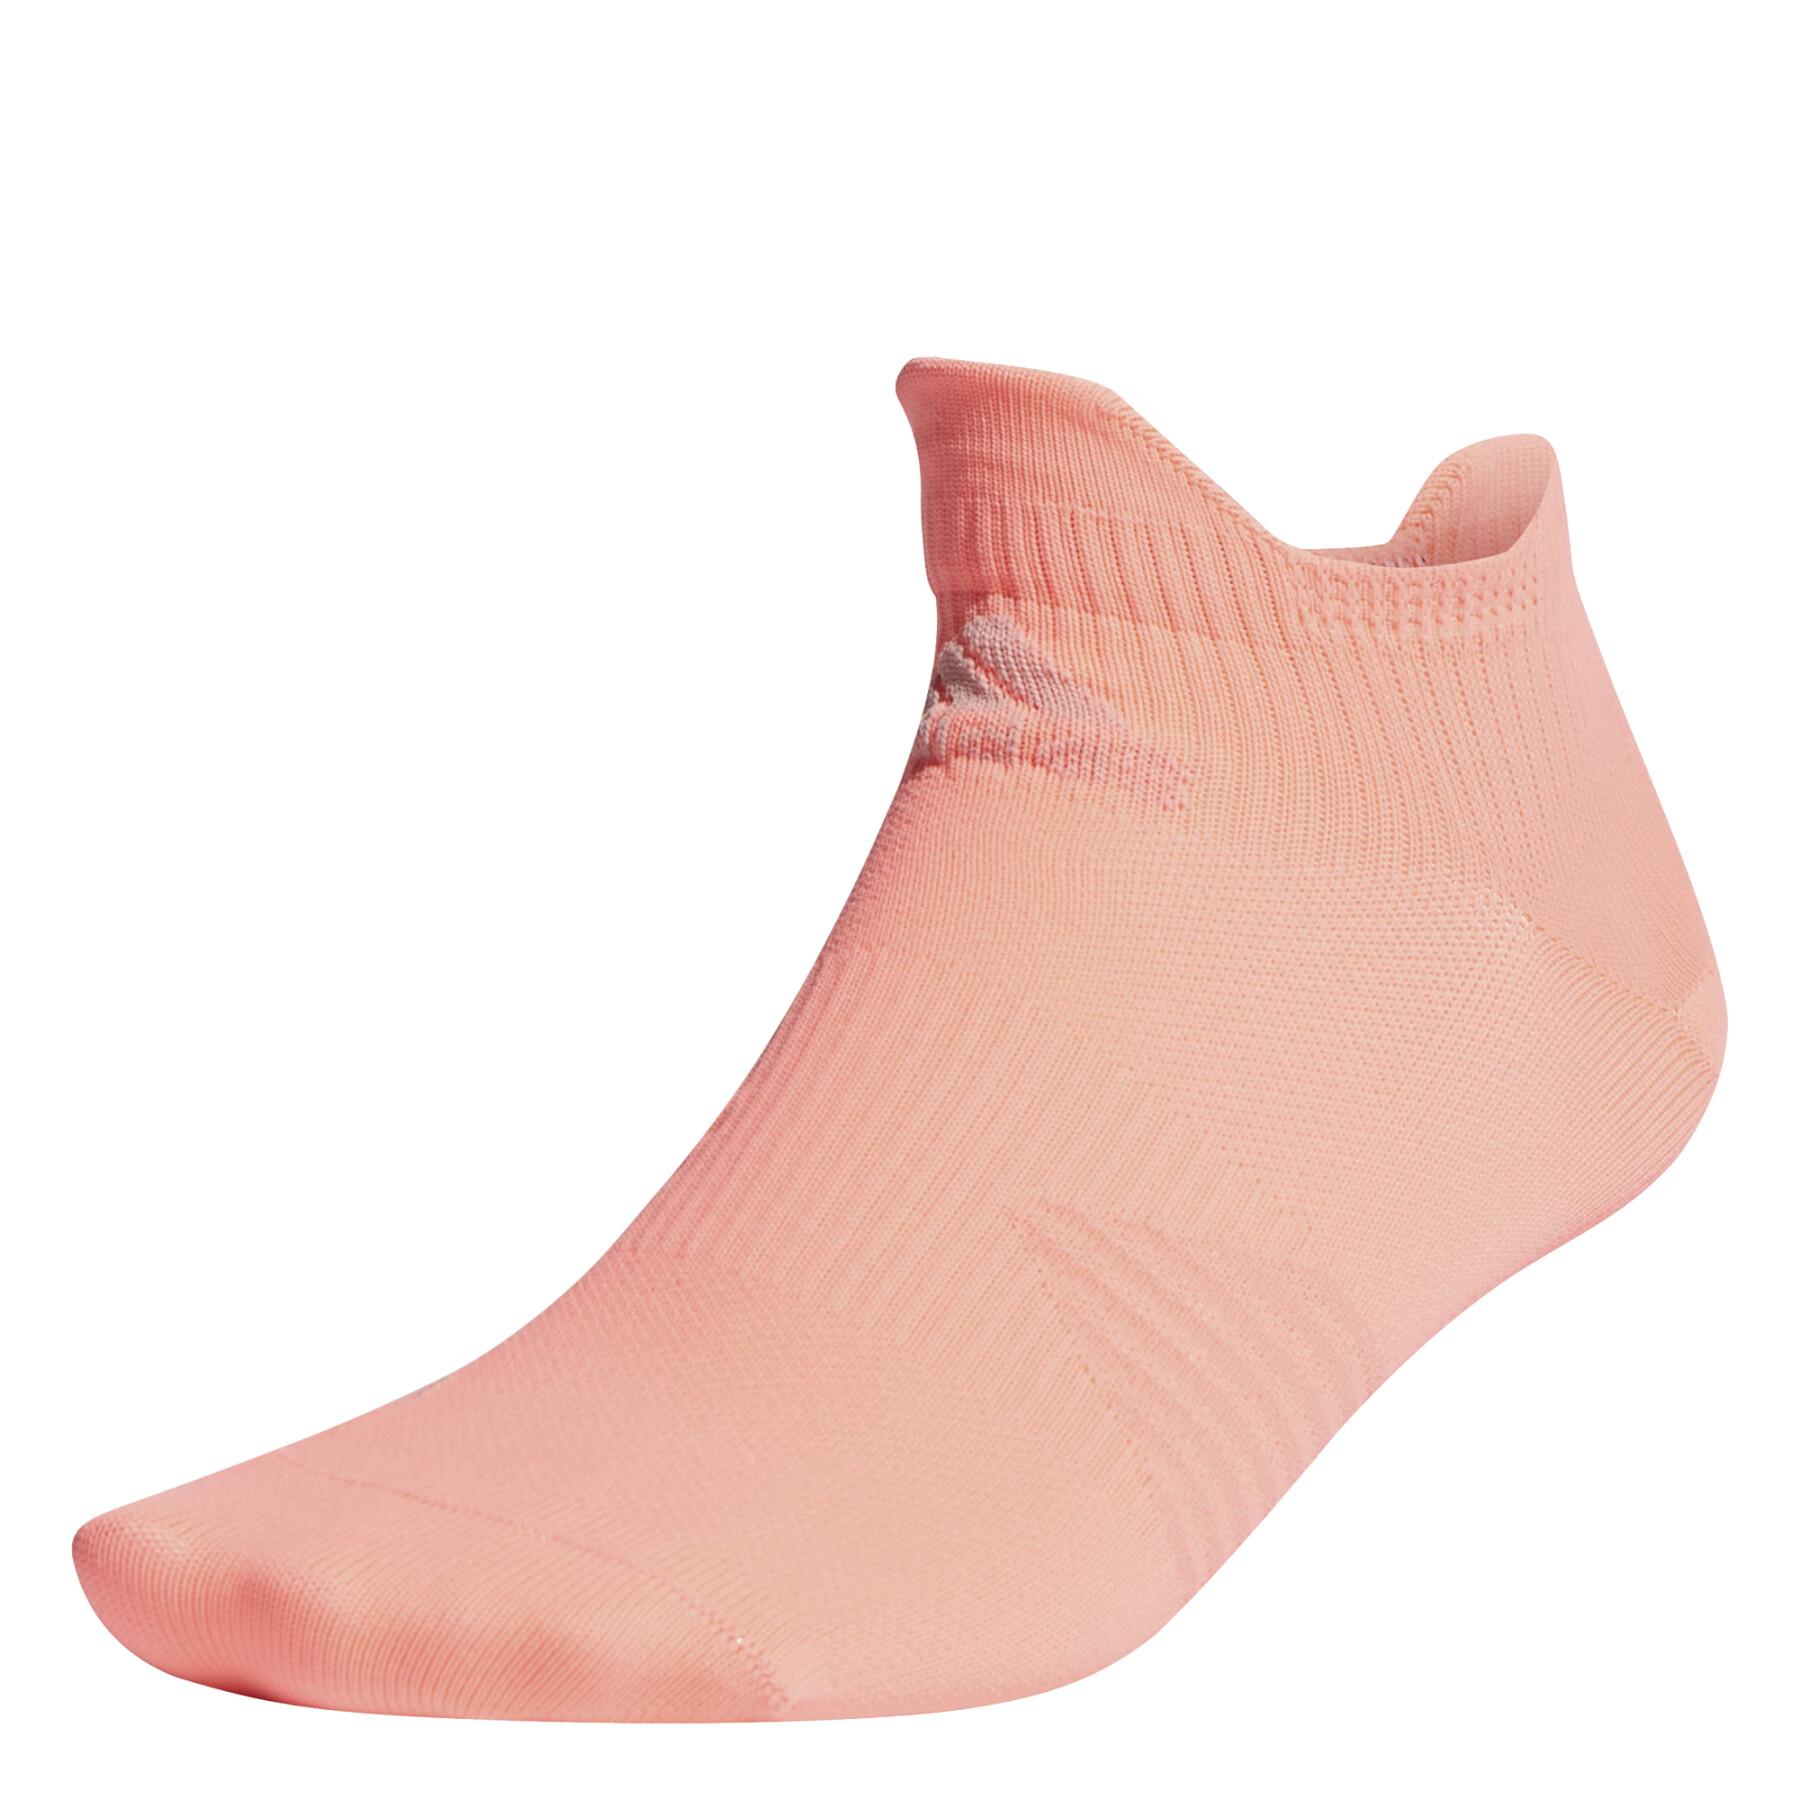 Chaussettes adidas Low-Cut Running